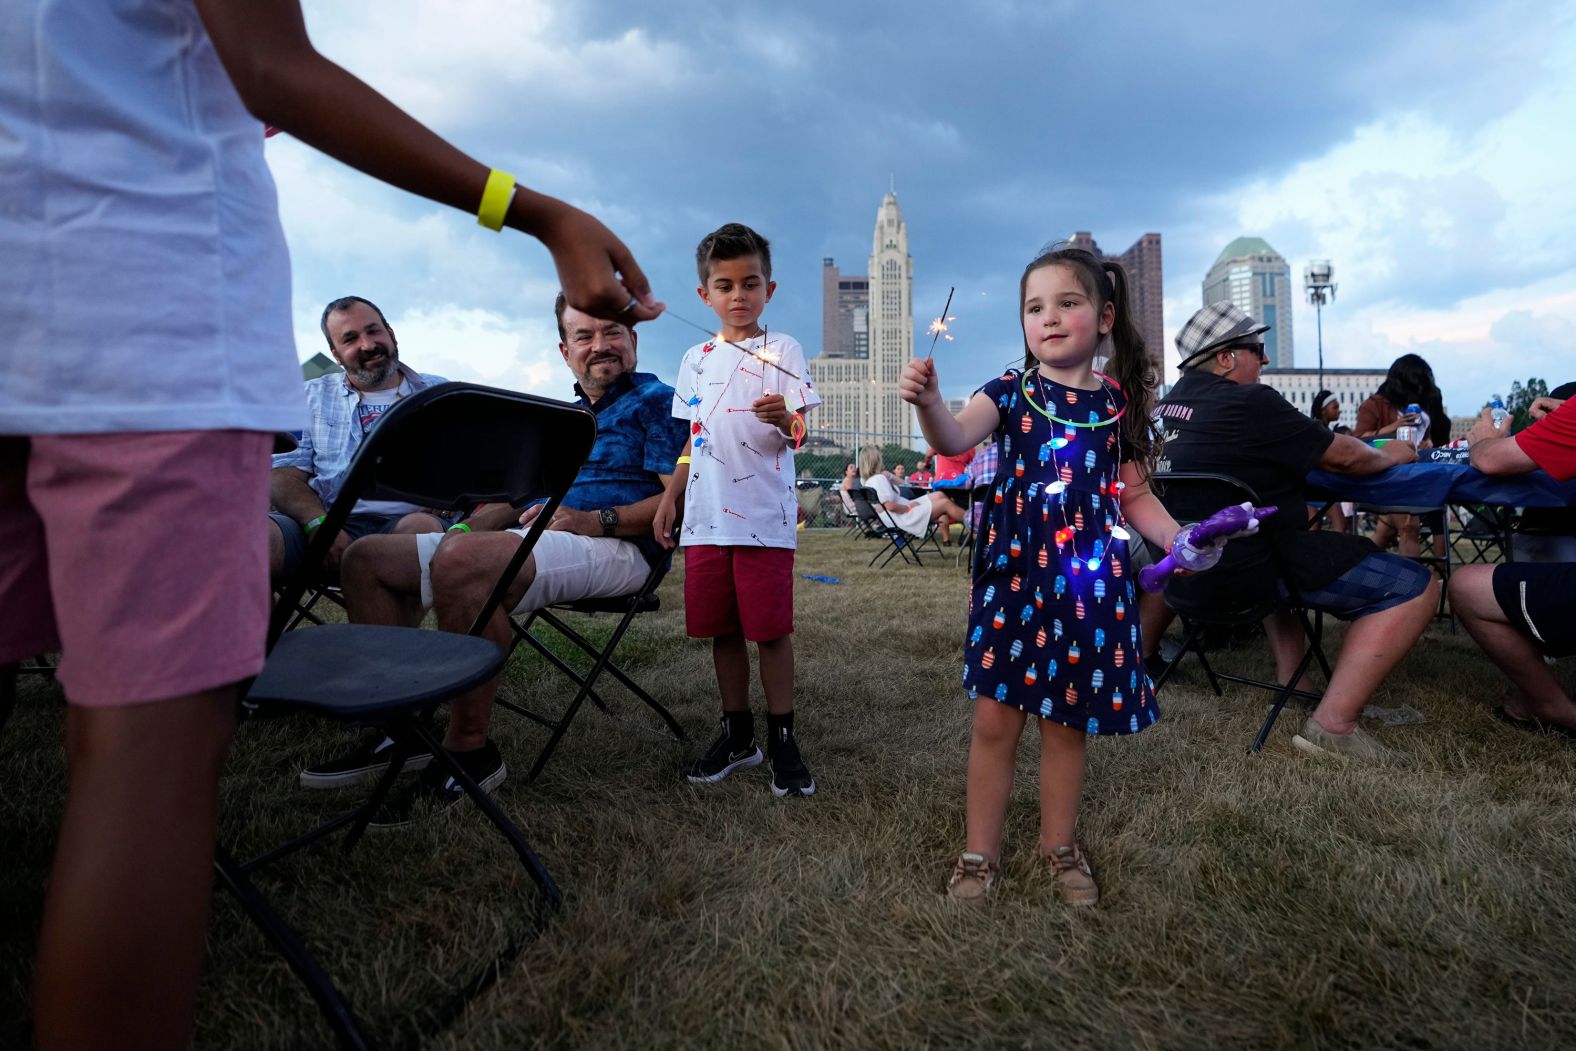 Children light sparklers during a fireworks show in Columbus, Ohio, on Friday.